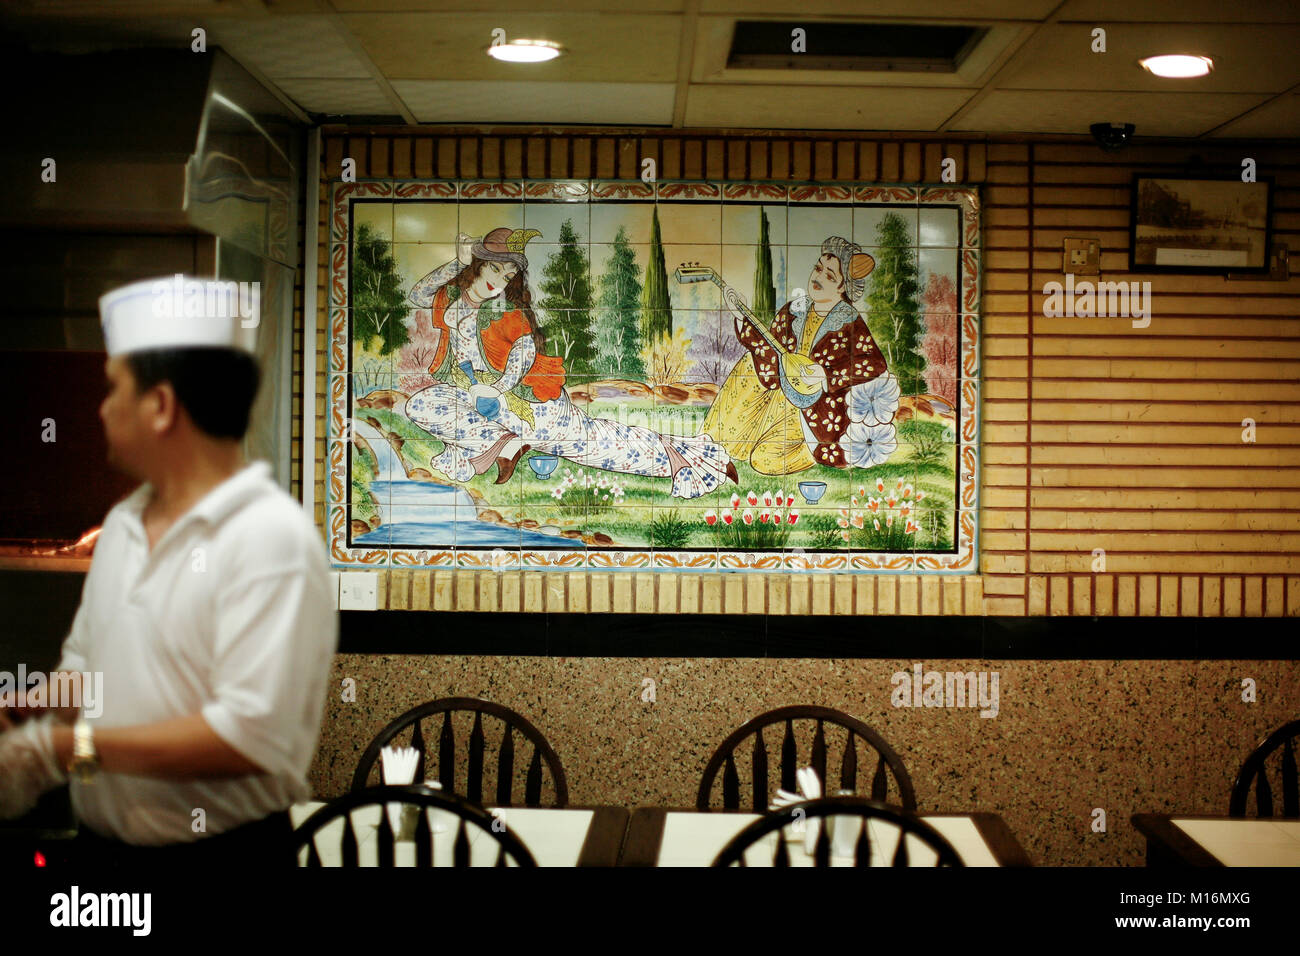 DUBAI, UNITED ARAB EMIRATES - October 17, 2008: A tile mural based on the Iranian love story of Layla and Majanon, in Tehran Restaurant in the Deira. Stock Photo